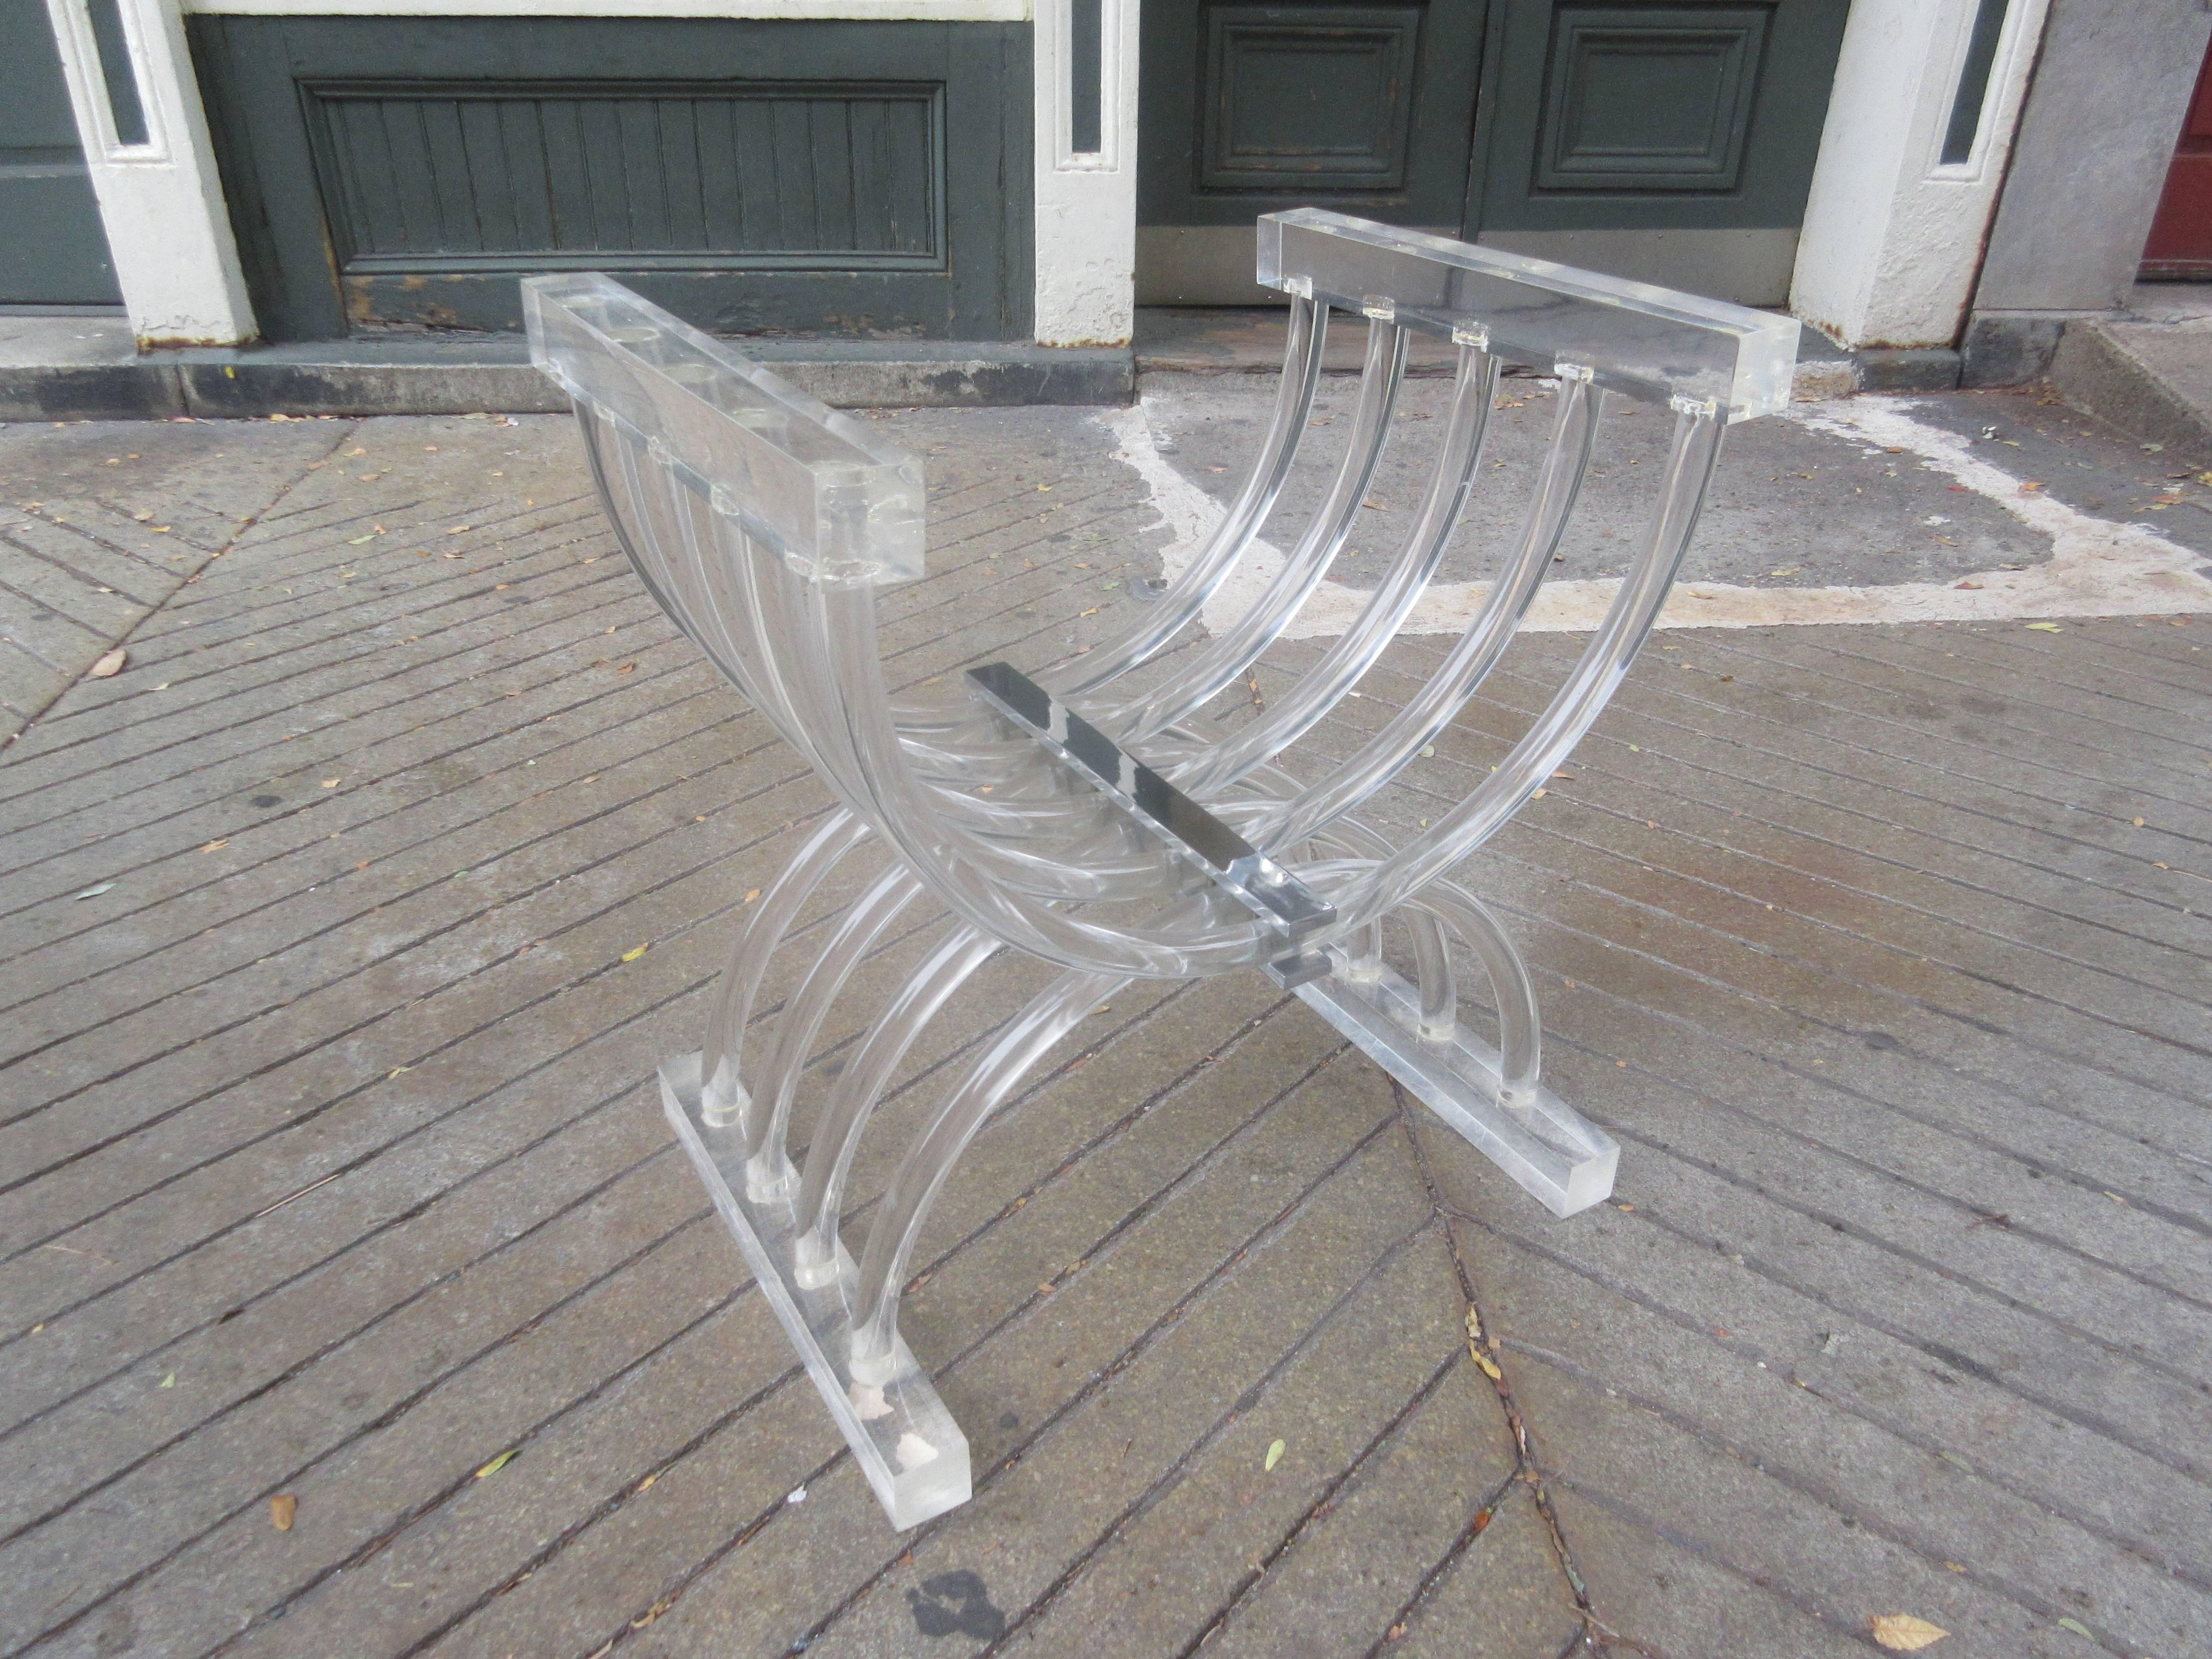 Very uncommon Lucite bench! Can be used with a vanity or as a stool! Heavy Lucite arms and sled runner feet connect with criss-crossing tubular Lucite! All held together with a centre chrome support! Cushion fabric has seen it's better day, but